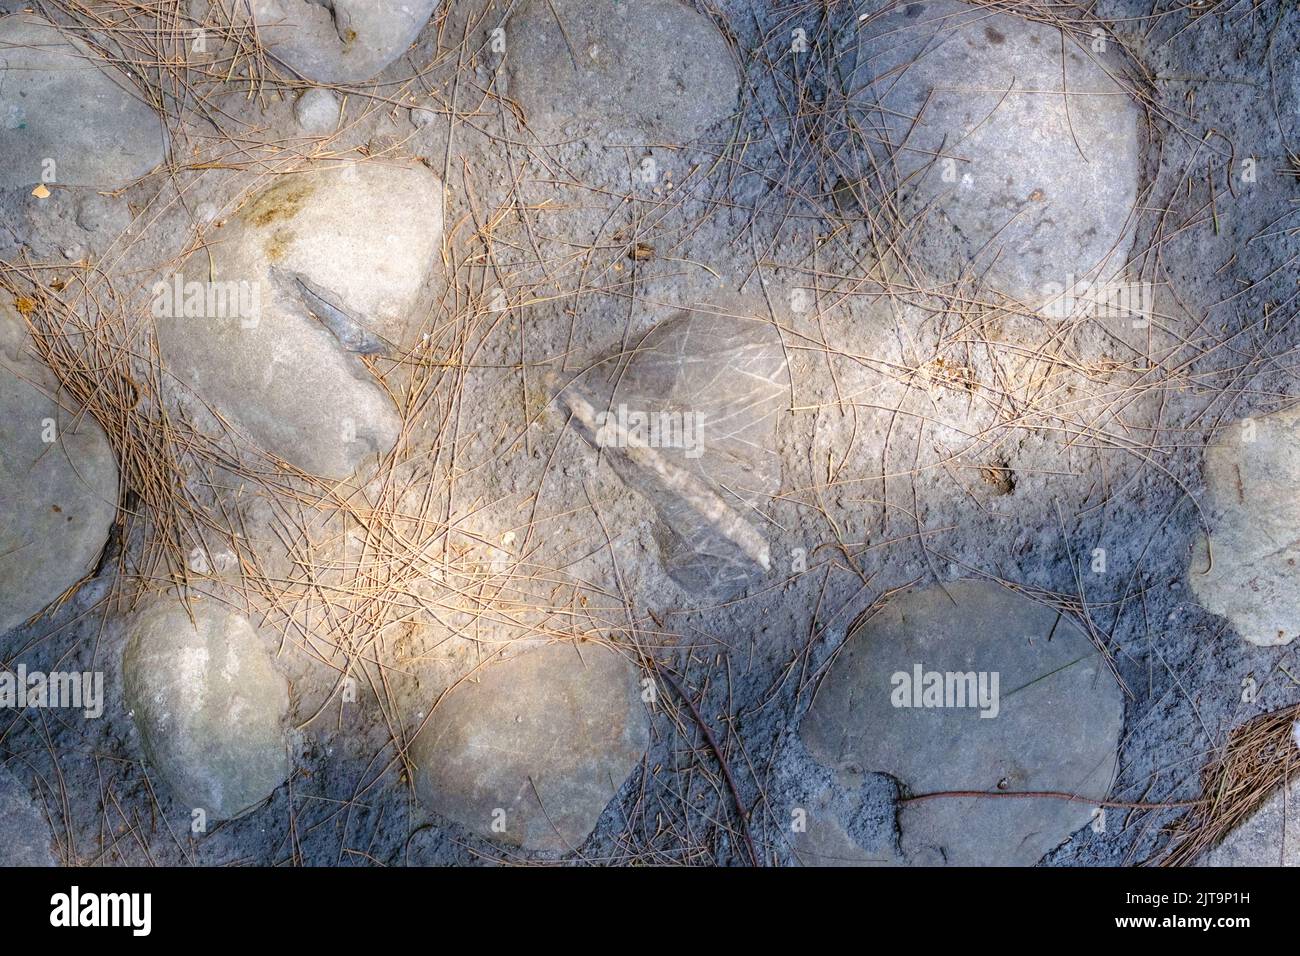 Texture of stone ground, abstract organic pattern, textured rocky background. Stock Photo